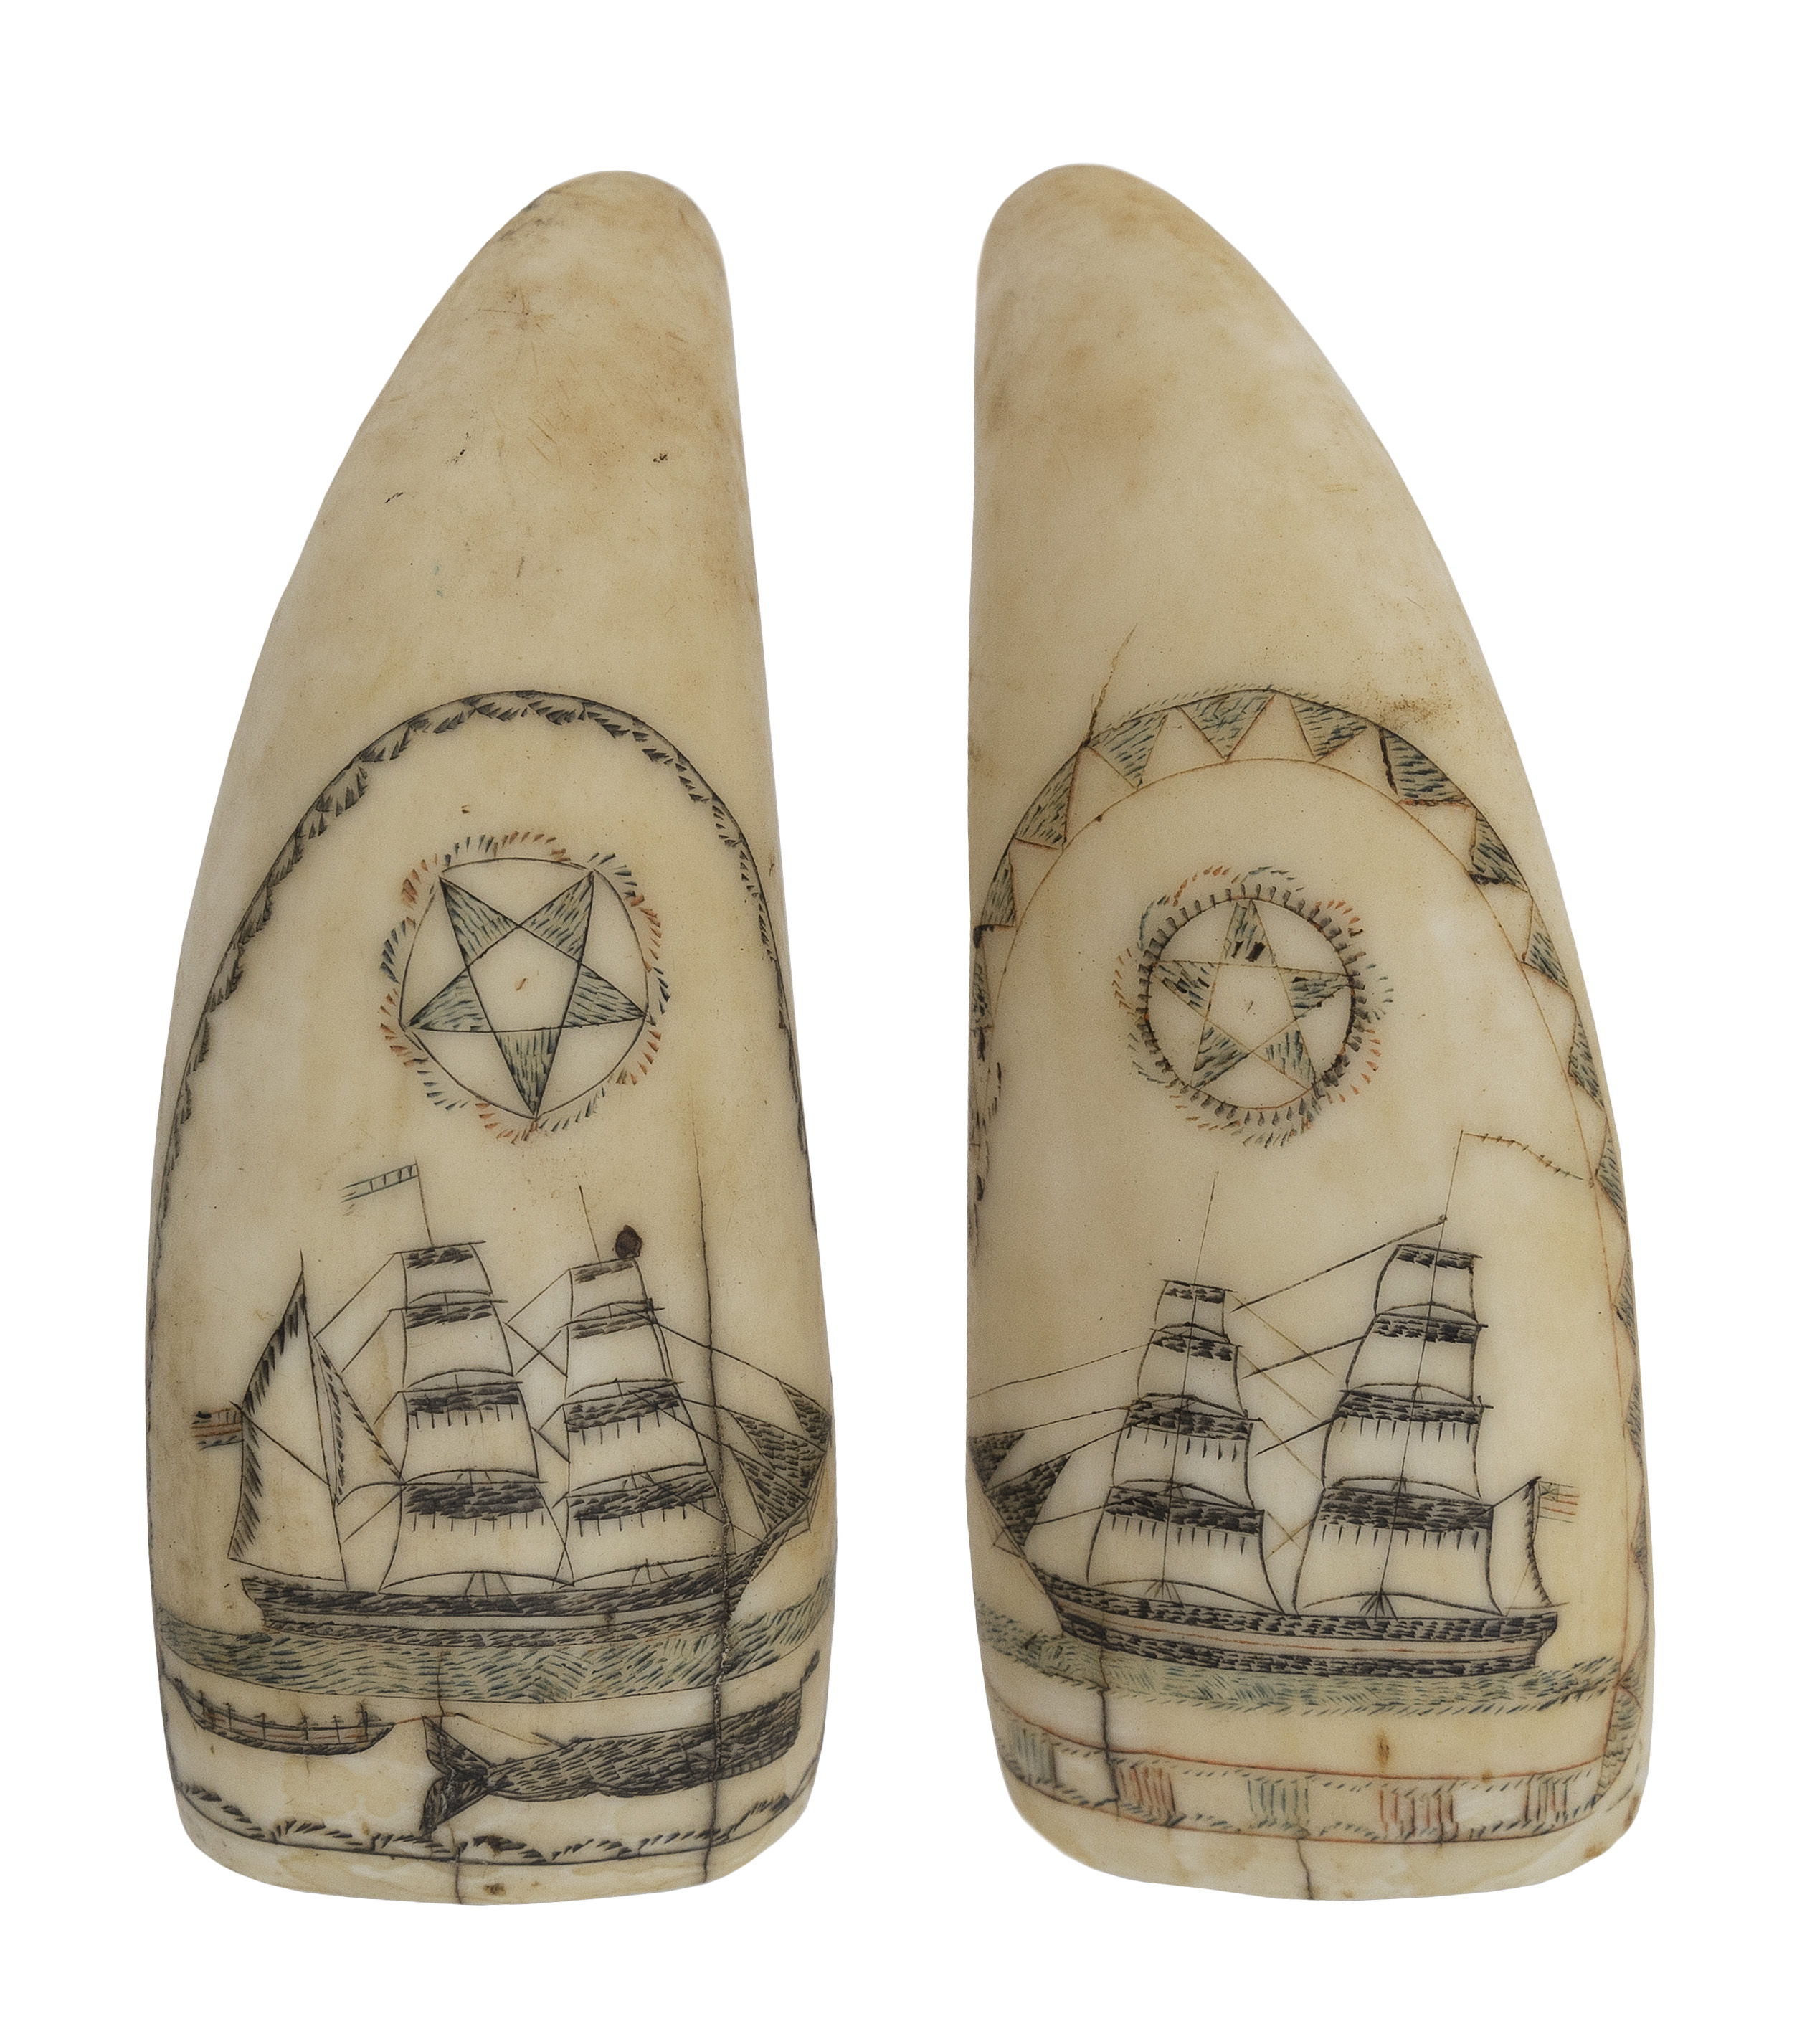 PAIR OF POLYCHROME SCRIMSHAW WHALE’S TEETH Mid-19th Century Lengths 3.25”.